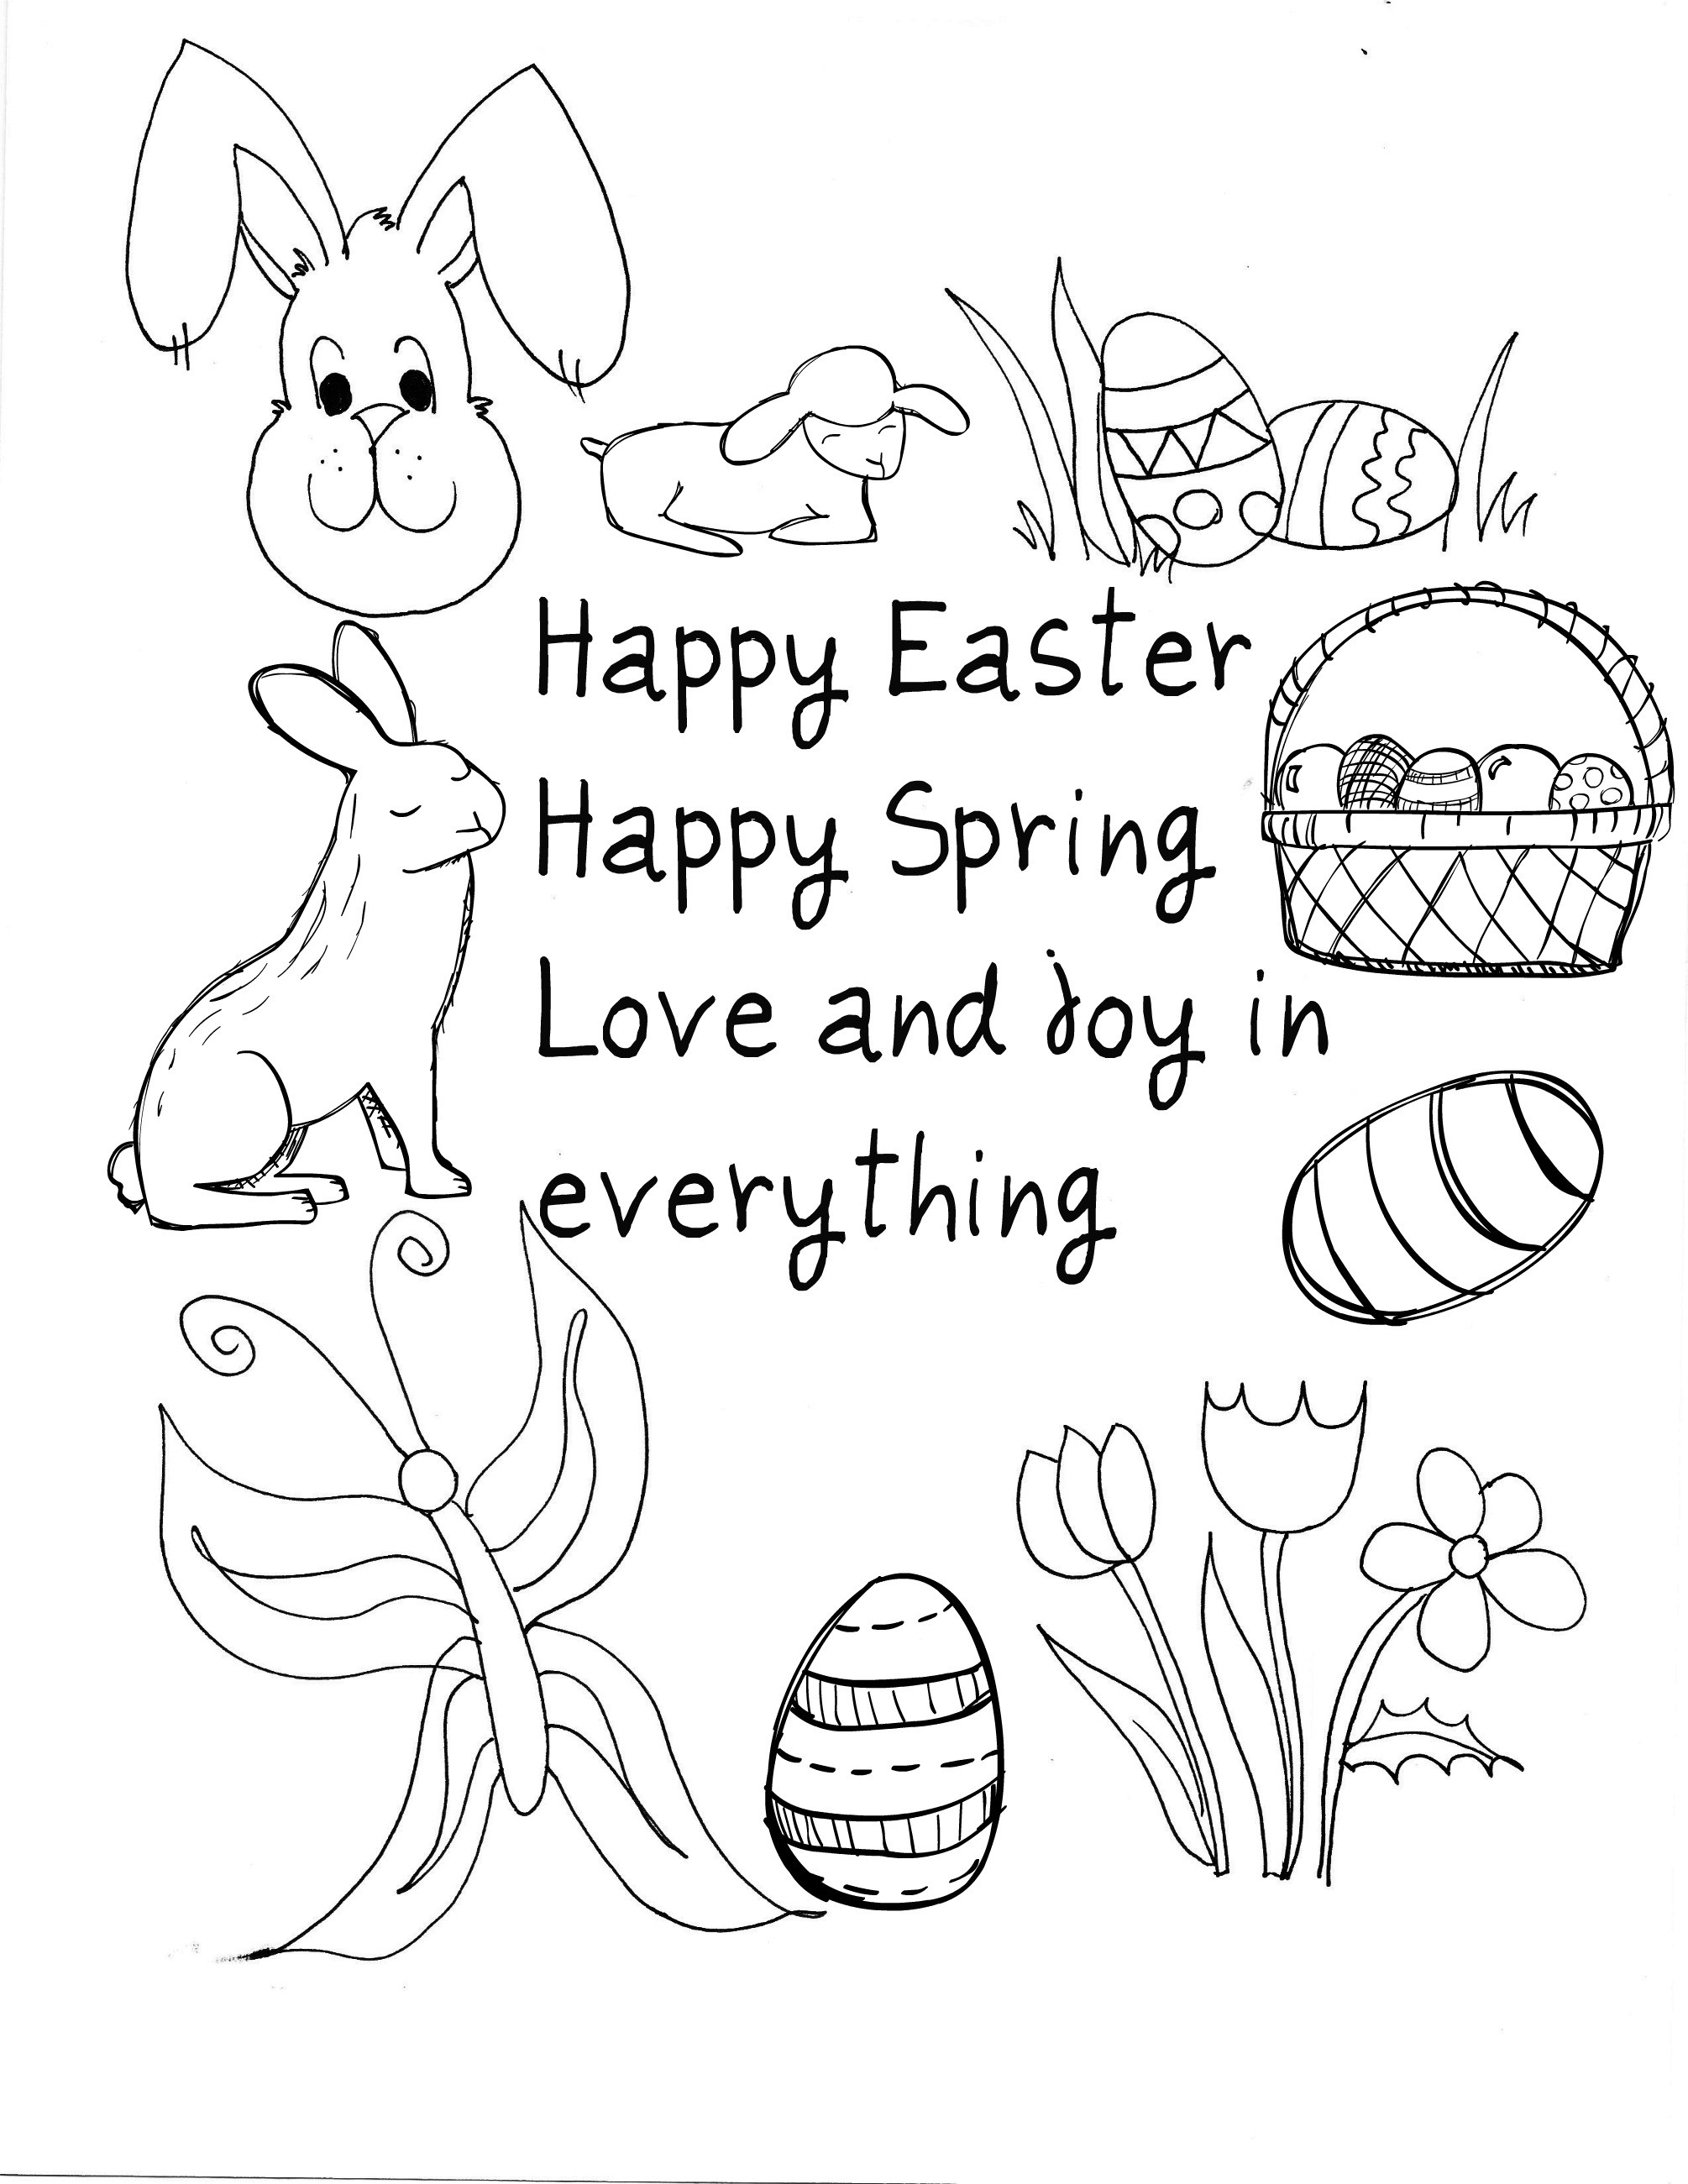 Resurrection Coloring Pages
 Happy Easter Coloring Pages Best Coloring Pages For Kids